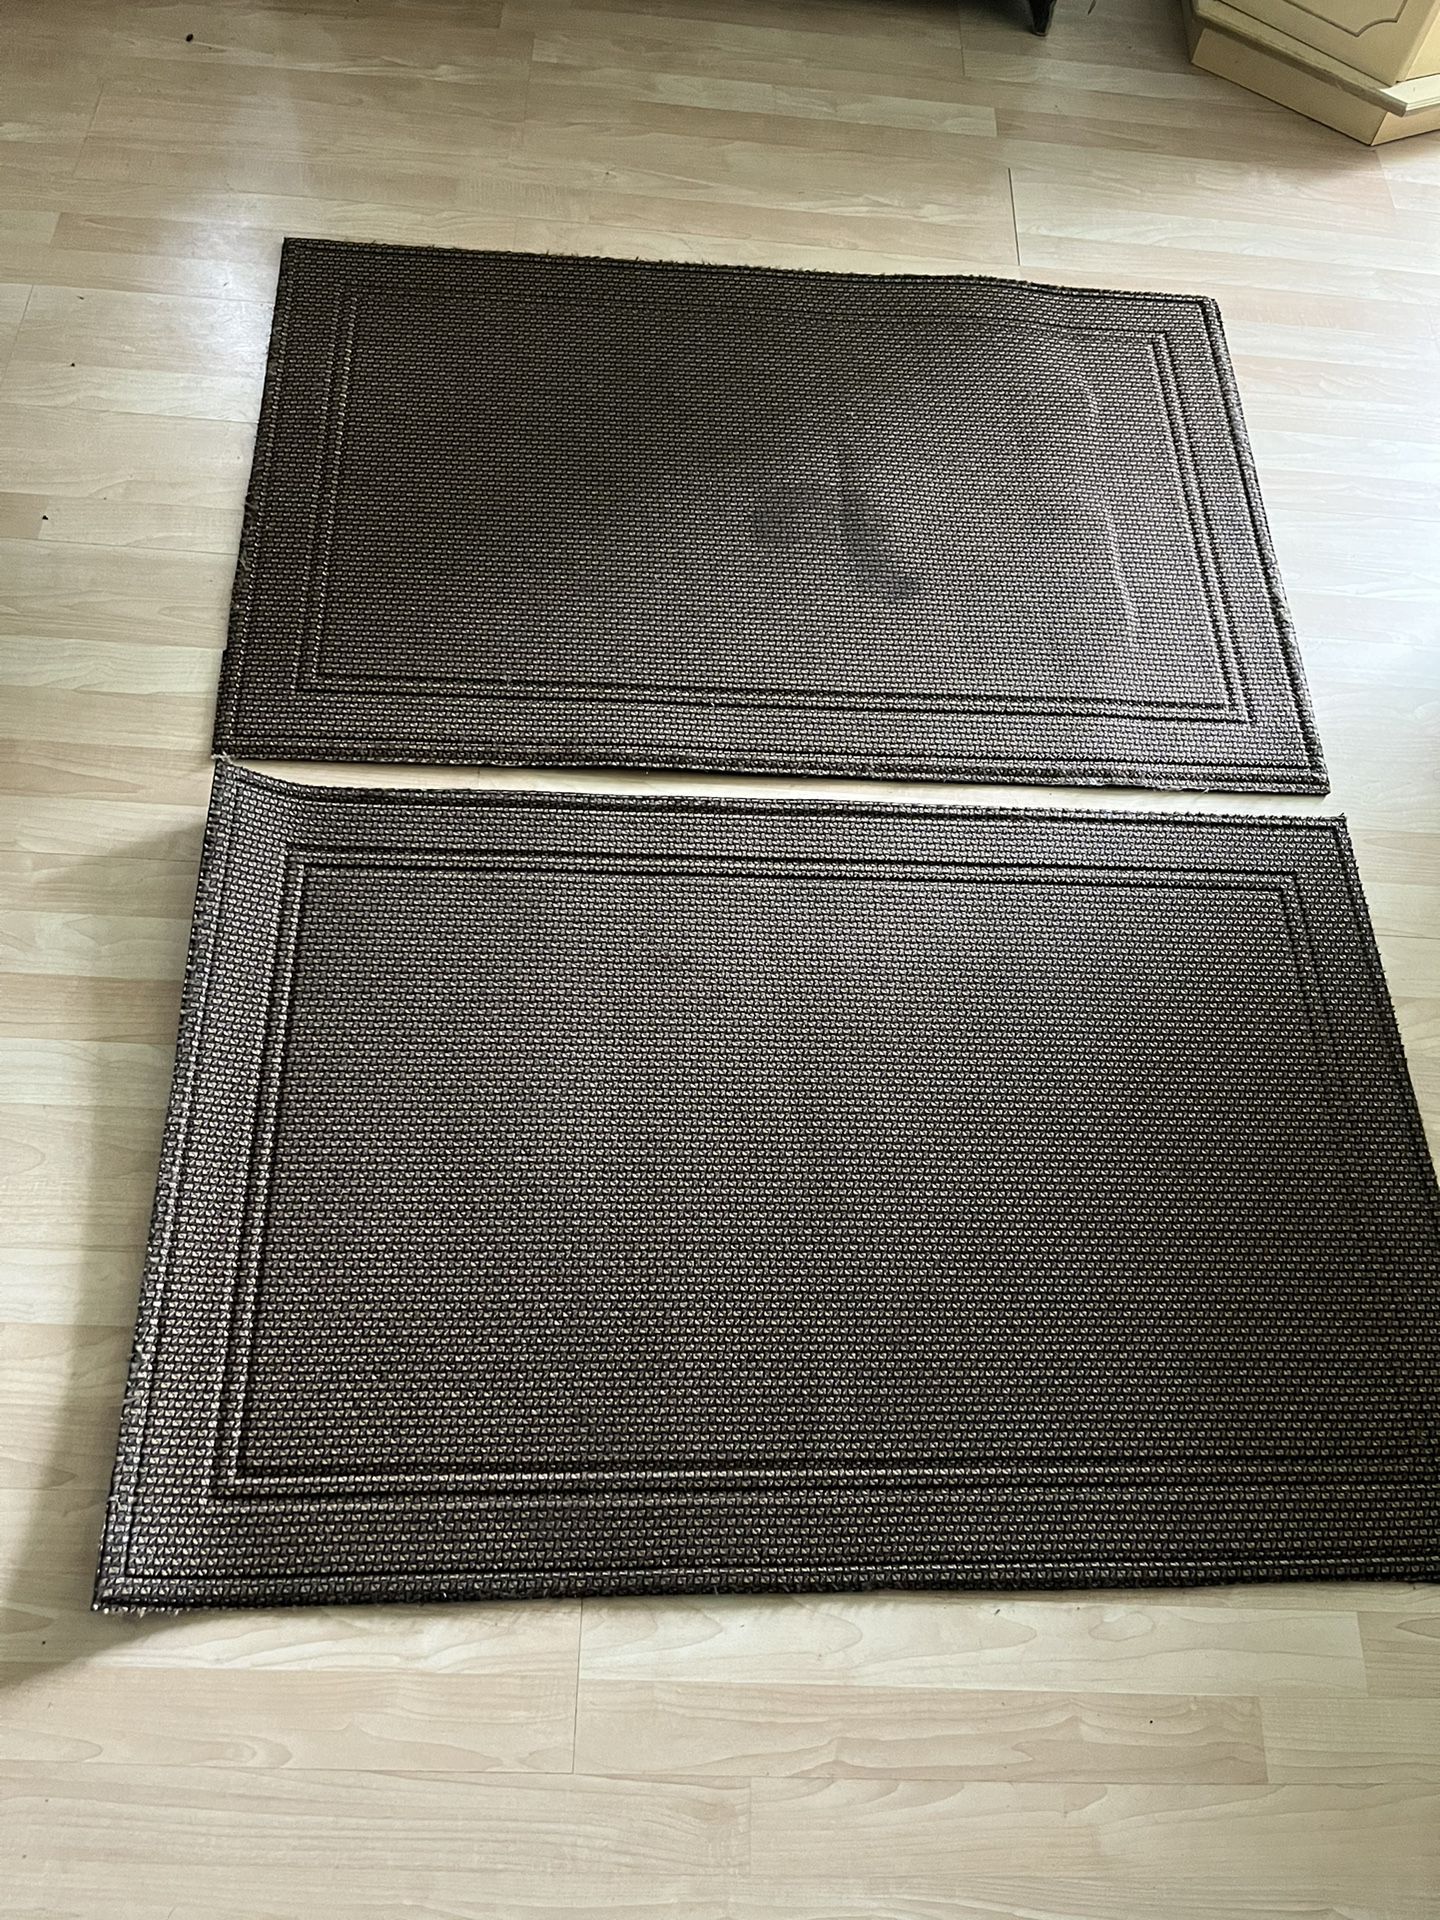 Pair Of Porch Or Garage Mats ($10 For Pair)